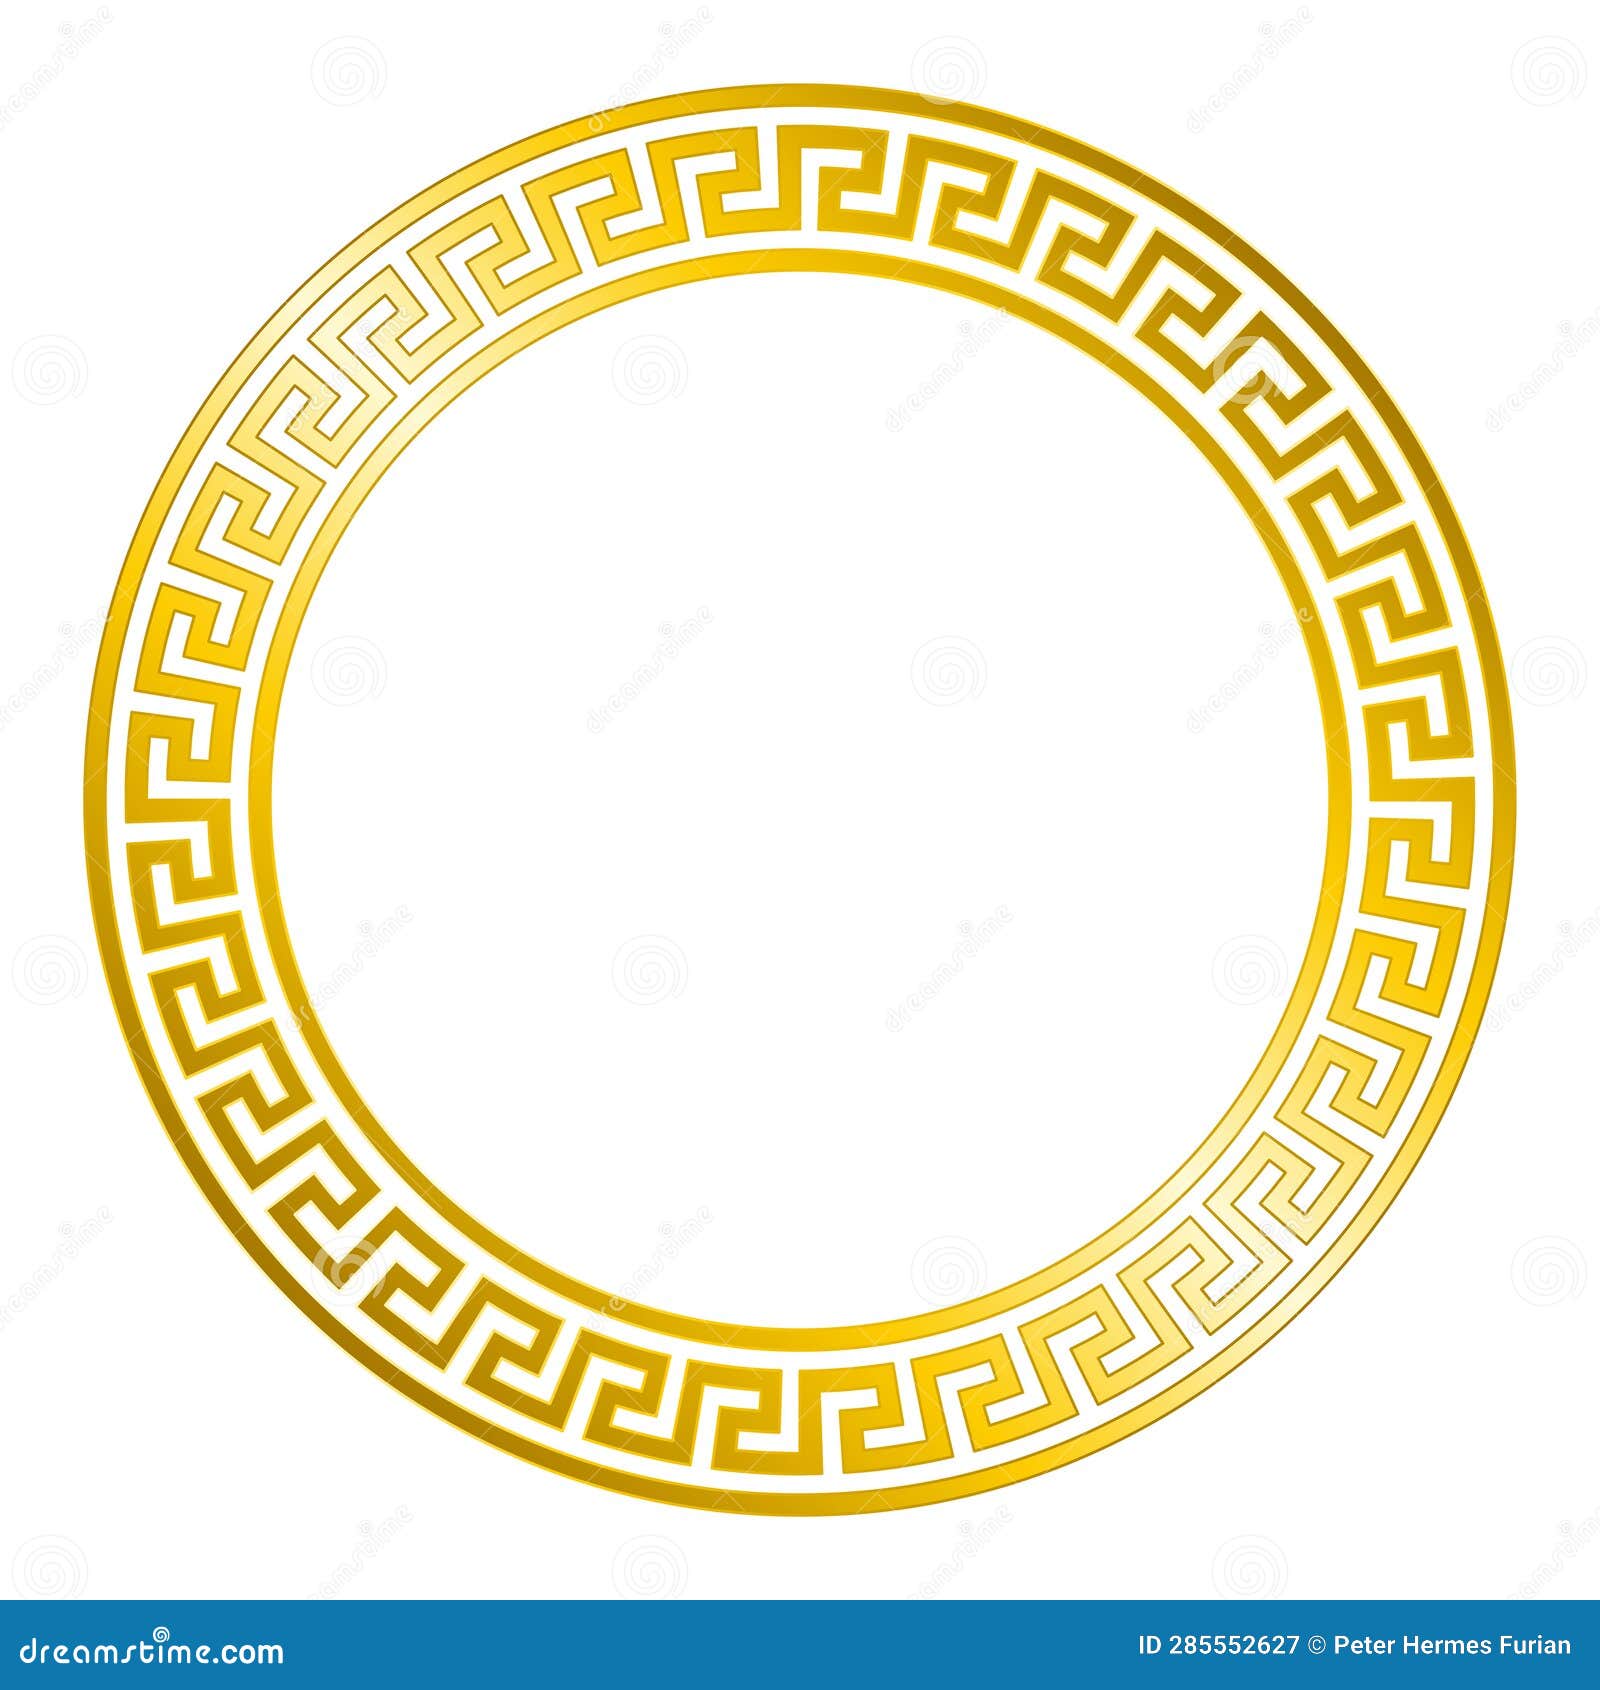 Simple Meander Pattern, Gold Colored Circle Frame and Decorative Border ...